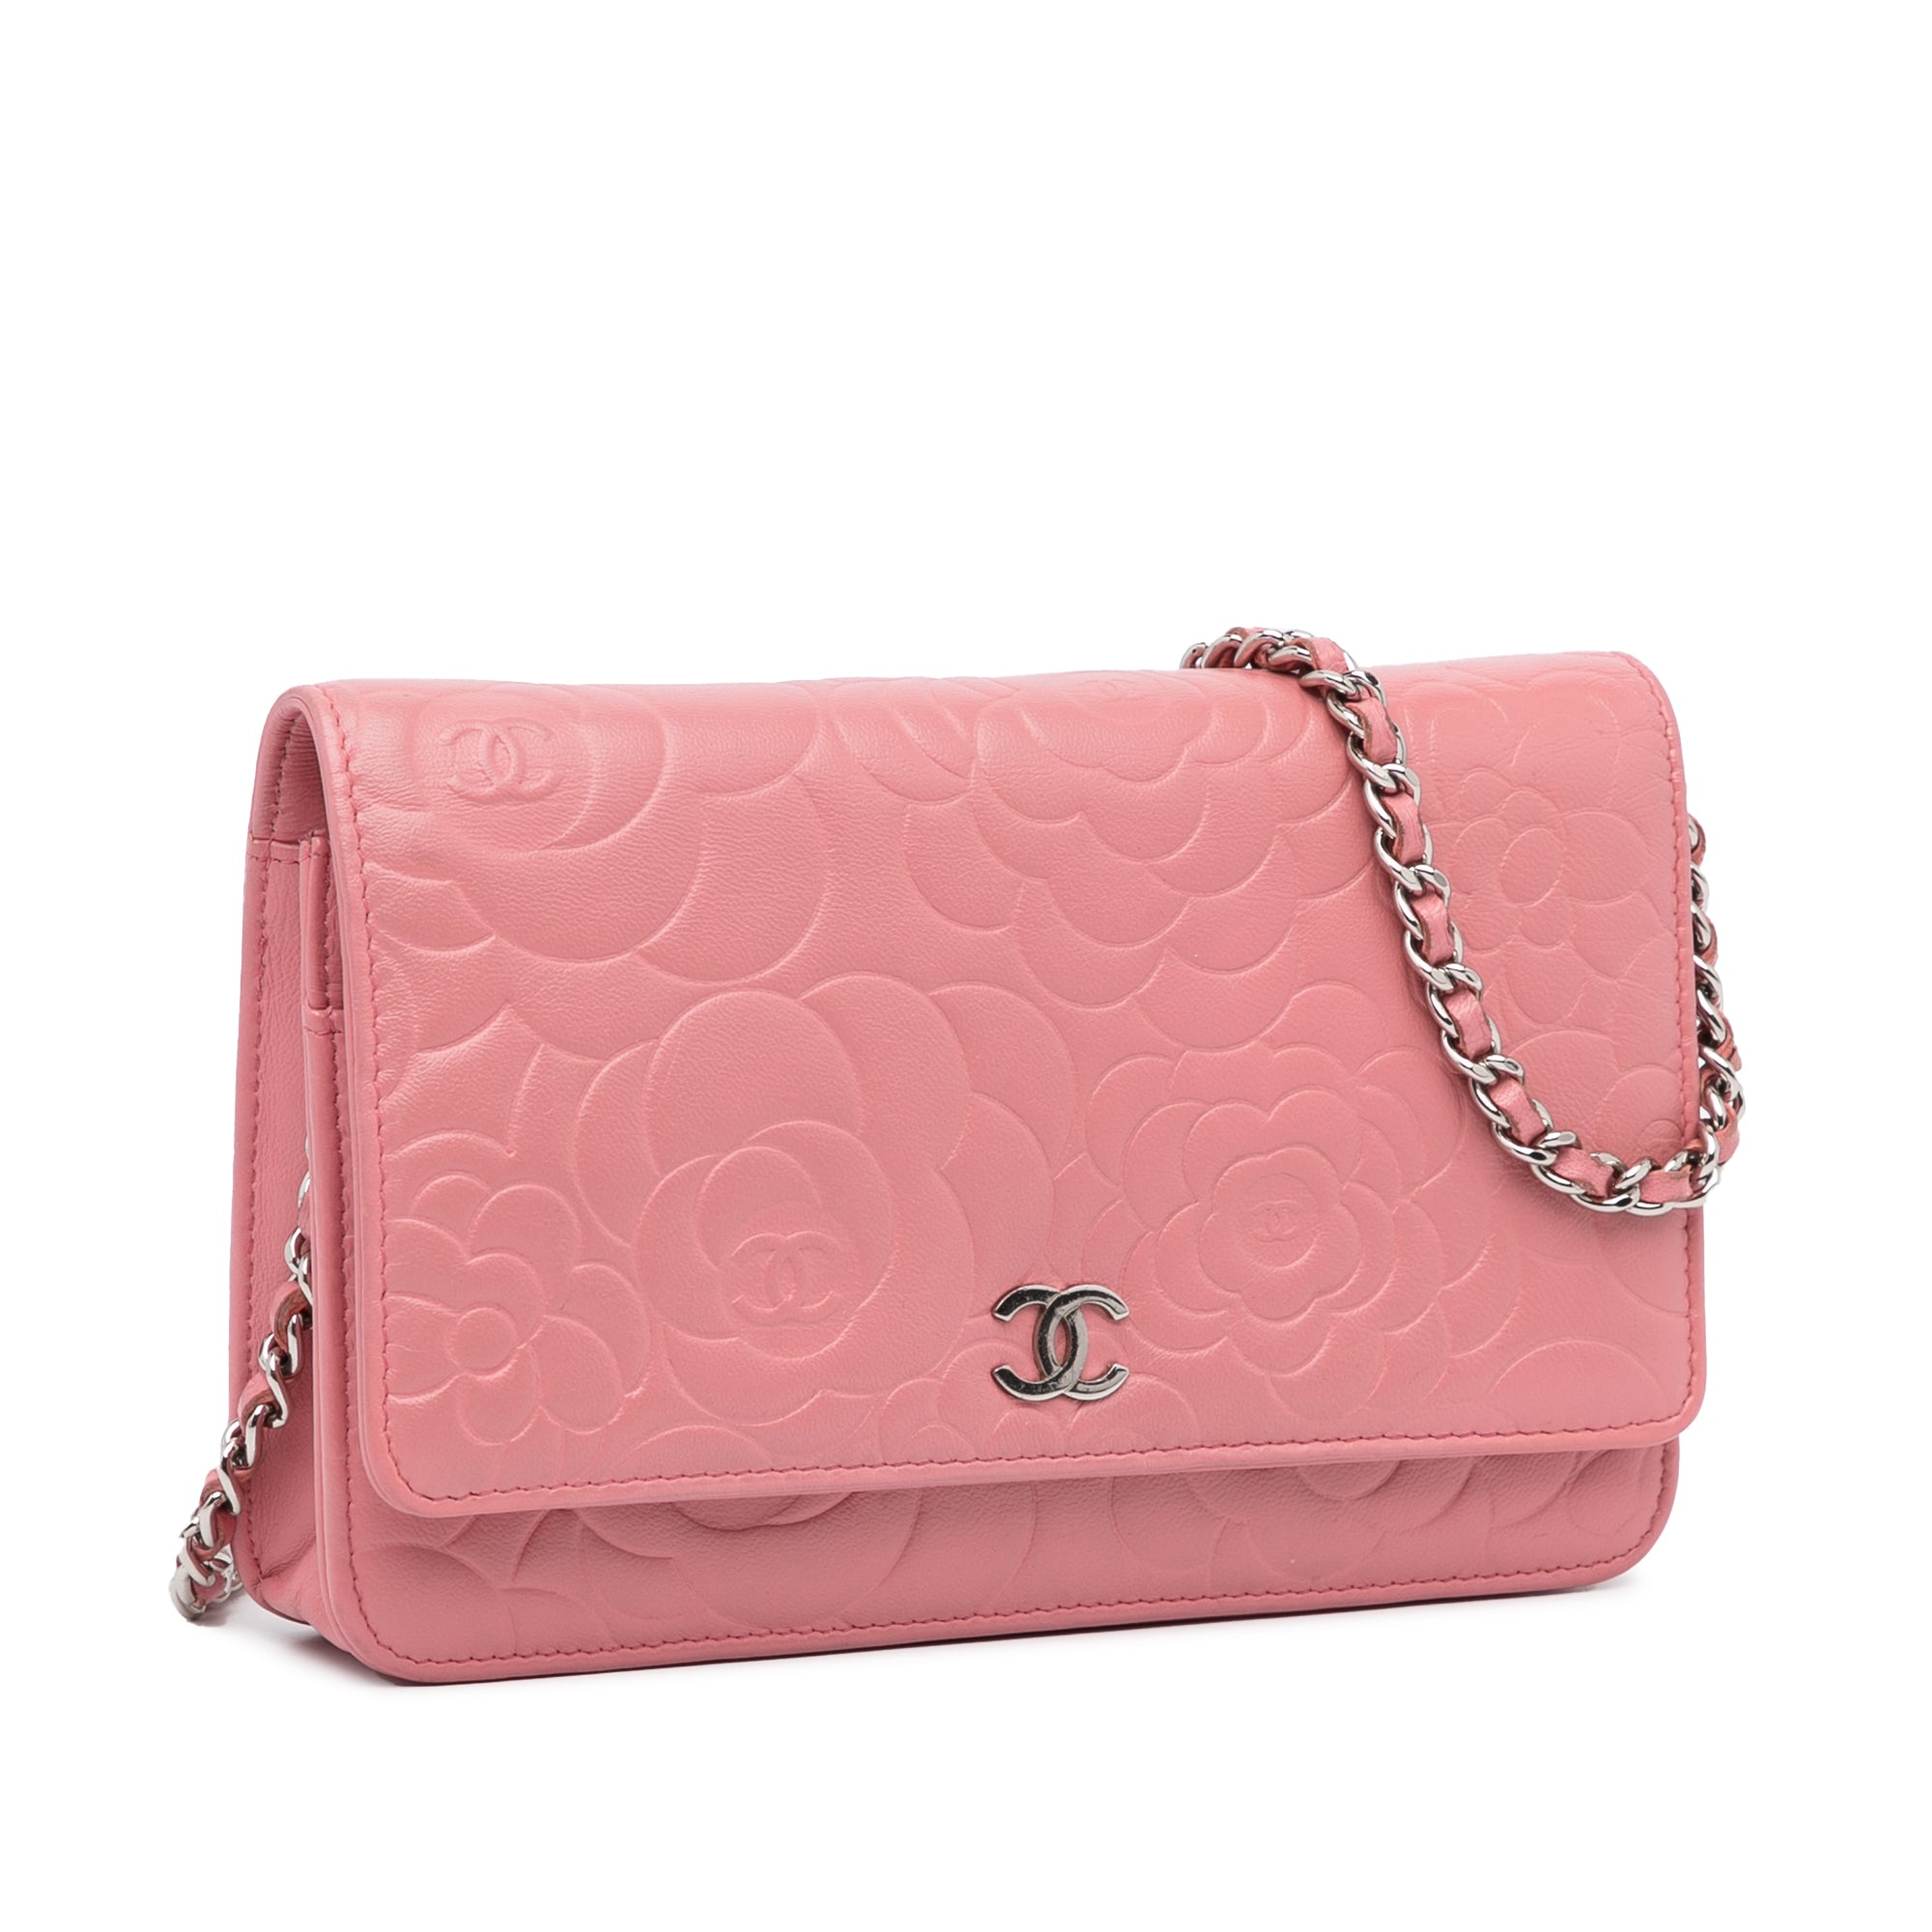 Chanel - Authenticated Wallet on Chain Timeless/Classique Handbag - Leather Pink for Women, Never Worn, with Tag